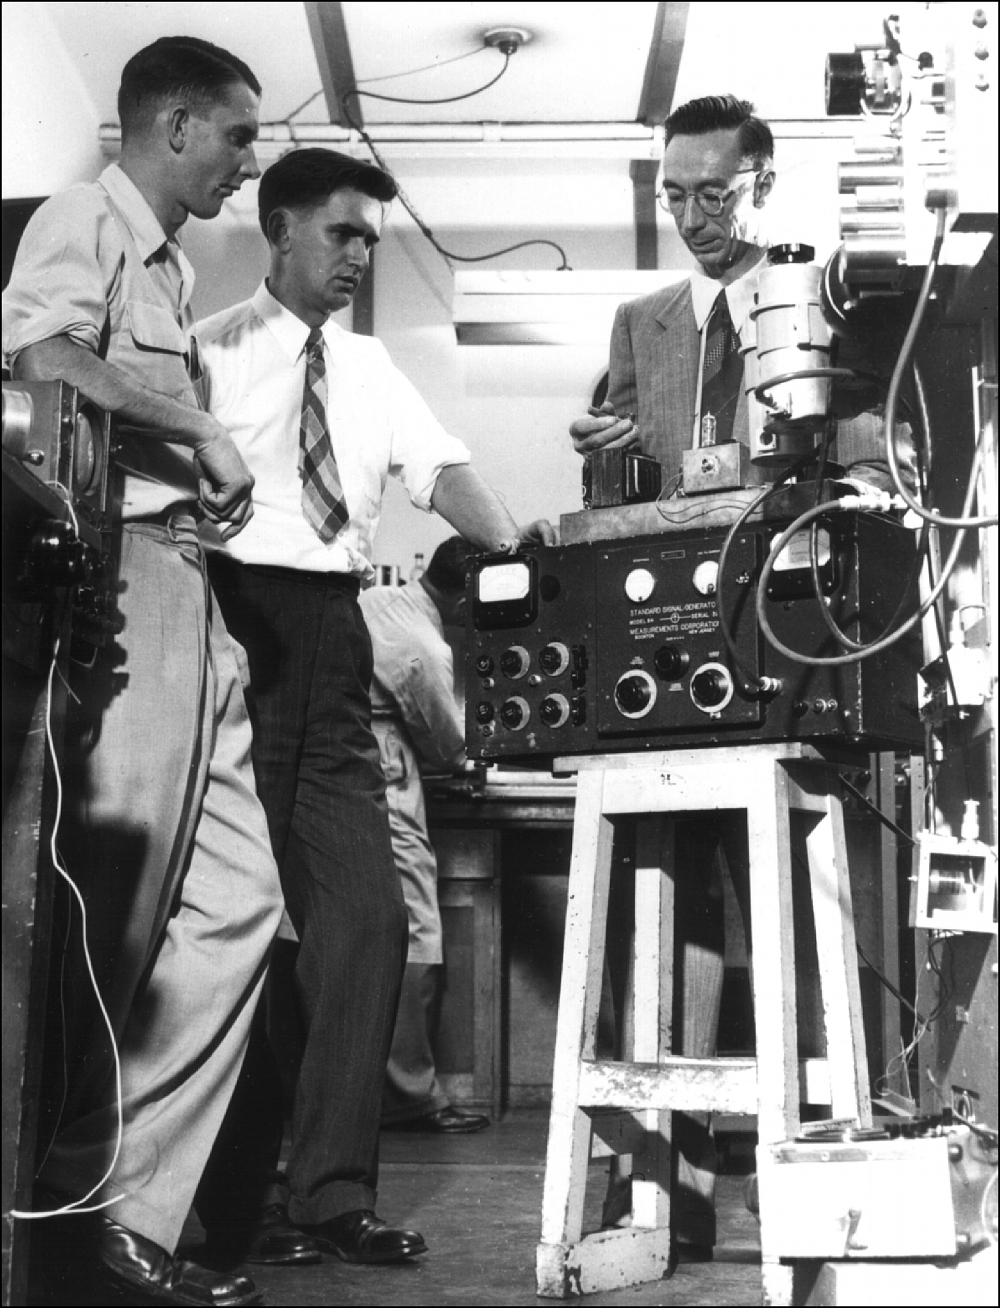 Three engineers in a 1940s laboratory looking at radio equipment.